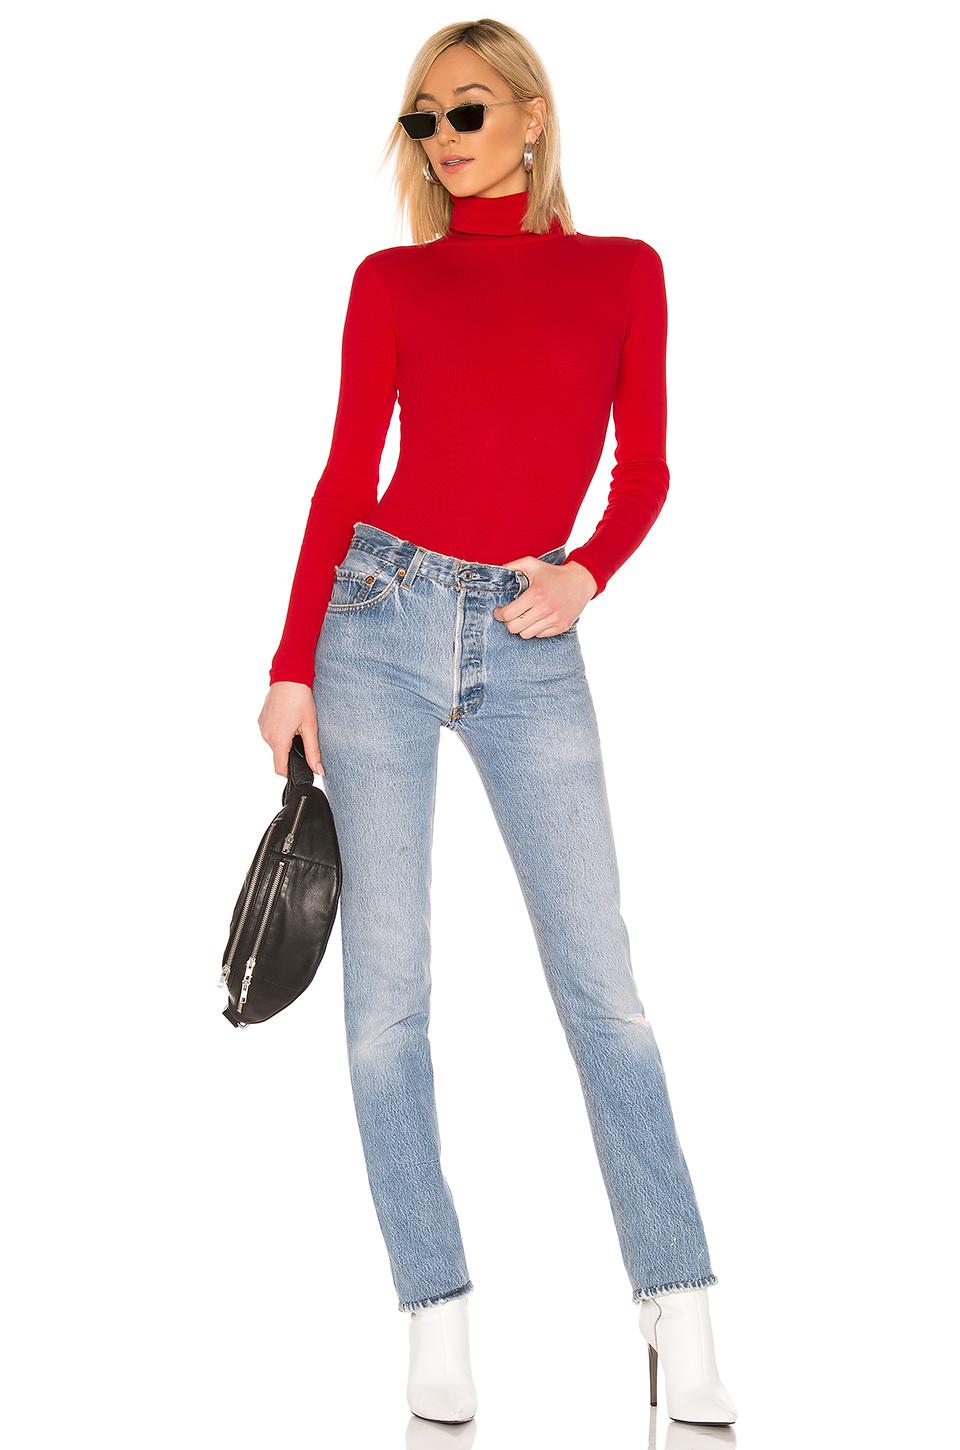 RE/DONE Cotton Rib Turtleneck Bodysuit in Red - Lyst